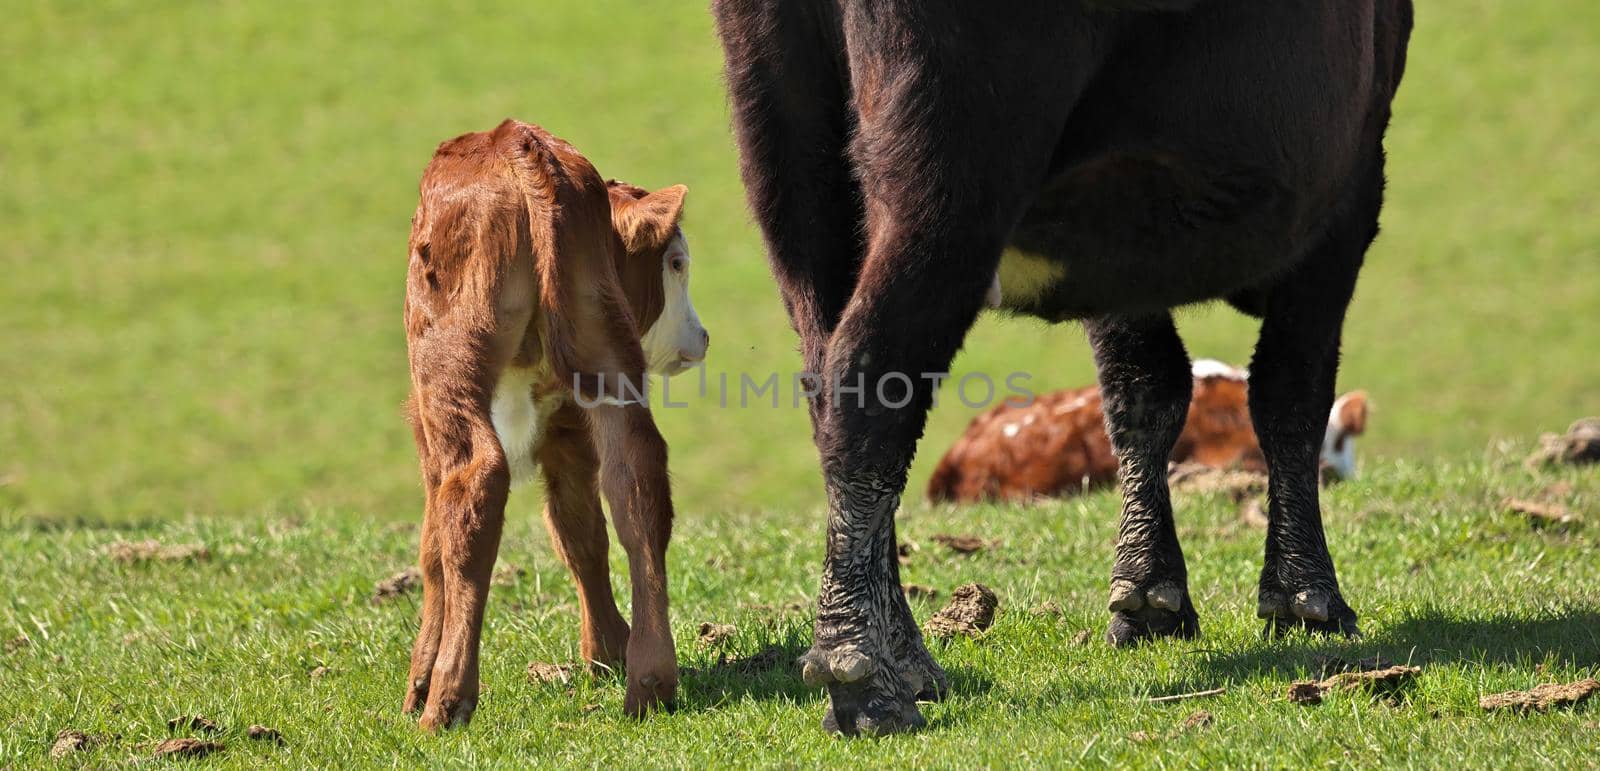 Young adorable beef cattle calf with its mother turned shyly away from camera. High quality photo